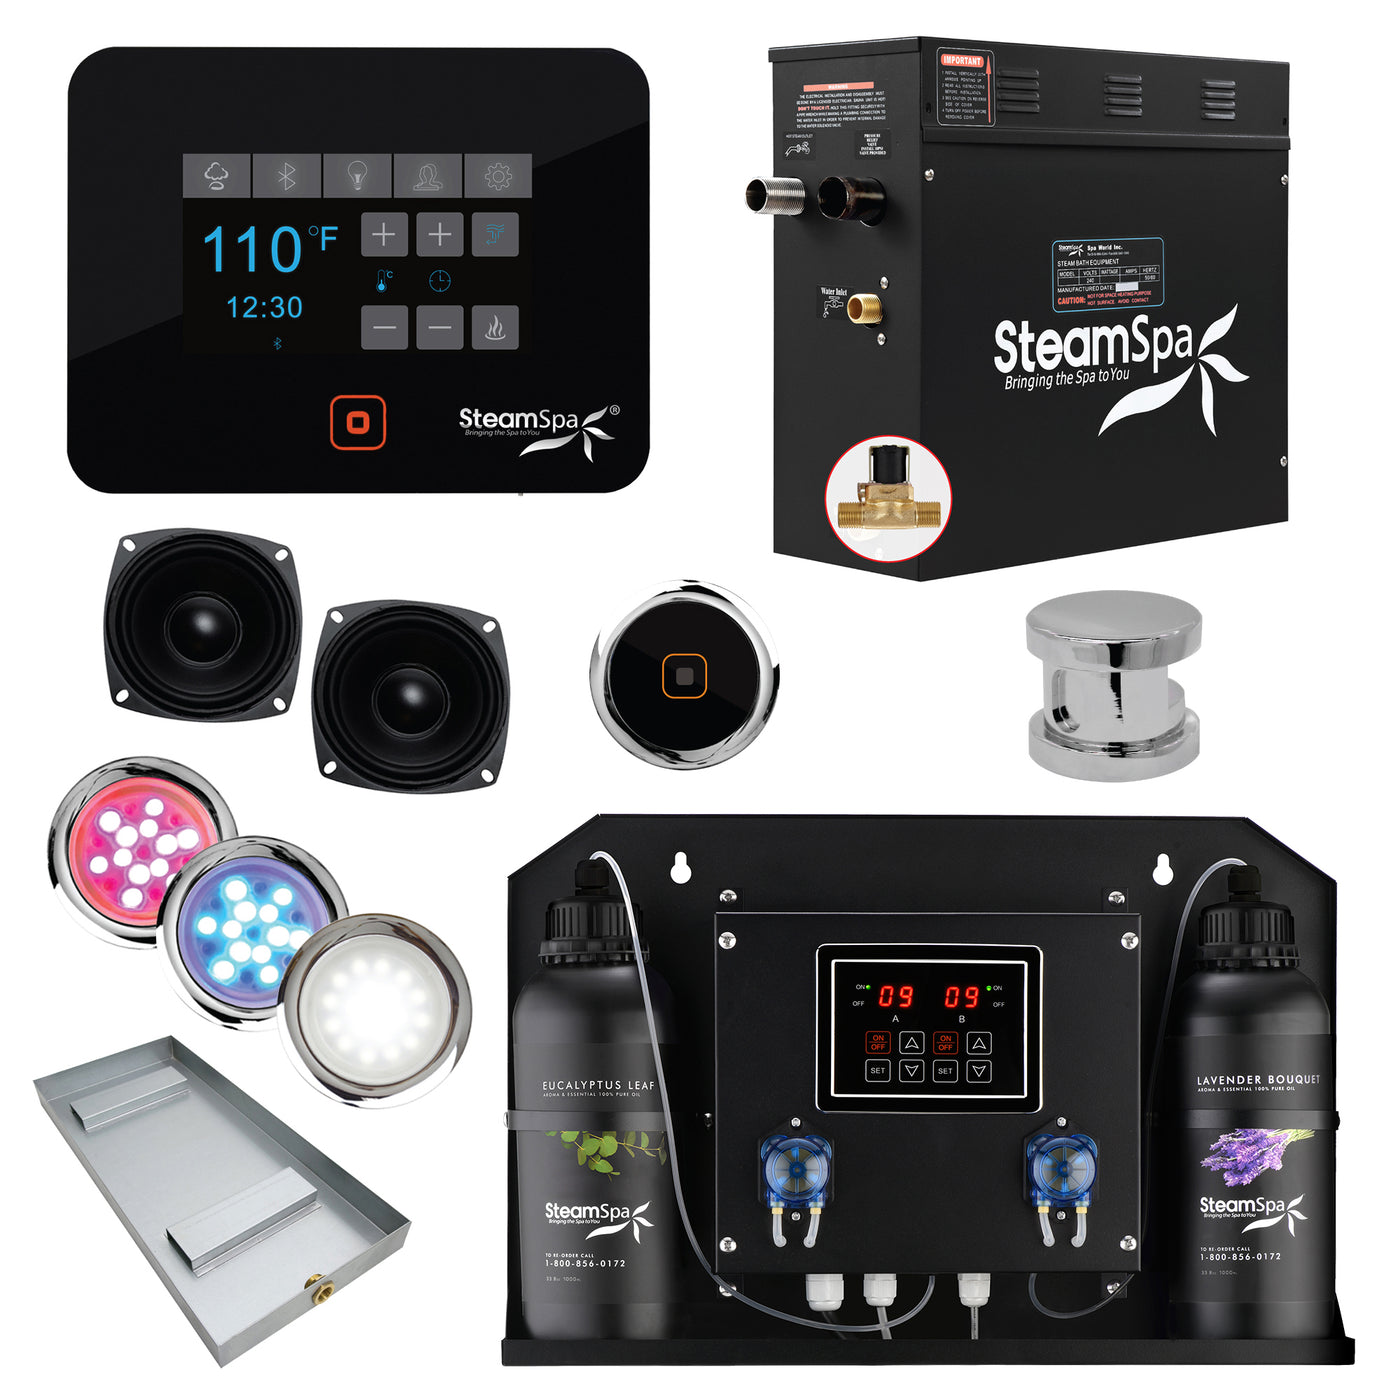 Black Series WiFi and Bluetooth 7.5kW QuickStart Steam Bath Generator Package with Dual Aroma Pump in Polished Chrome BKT750CH-ADP